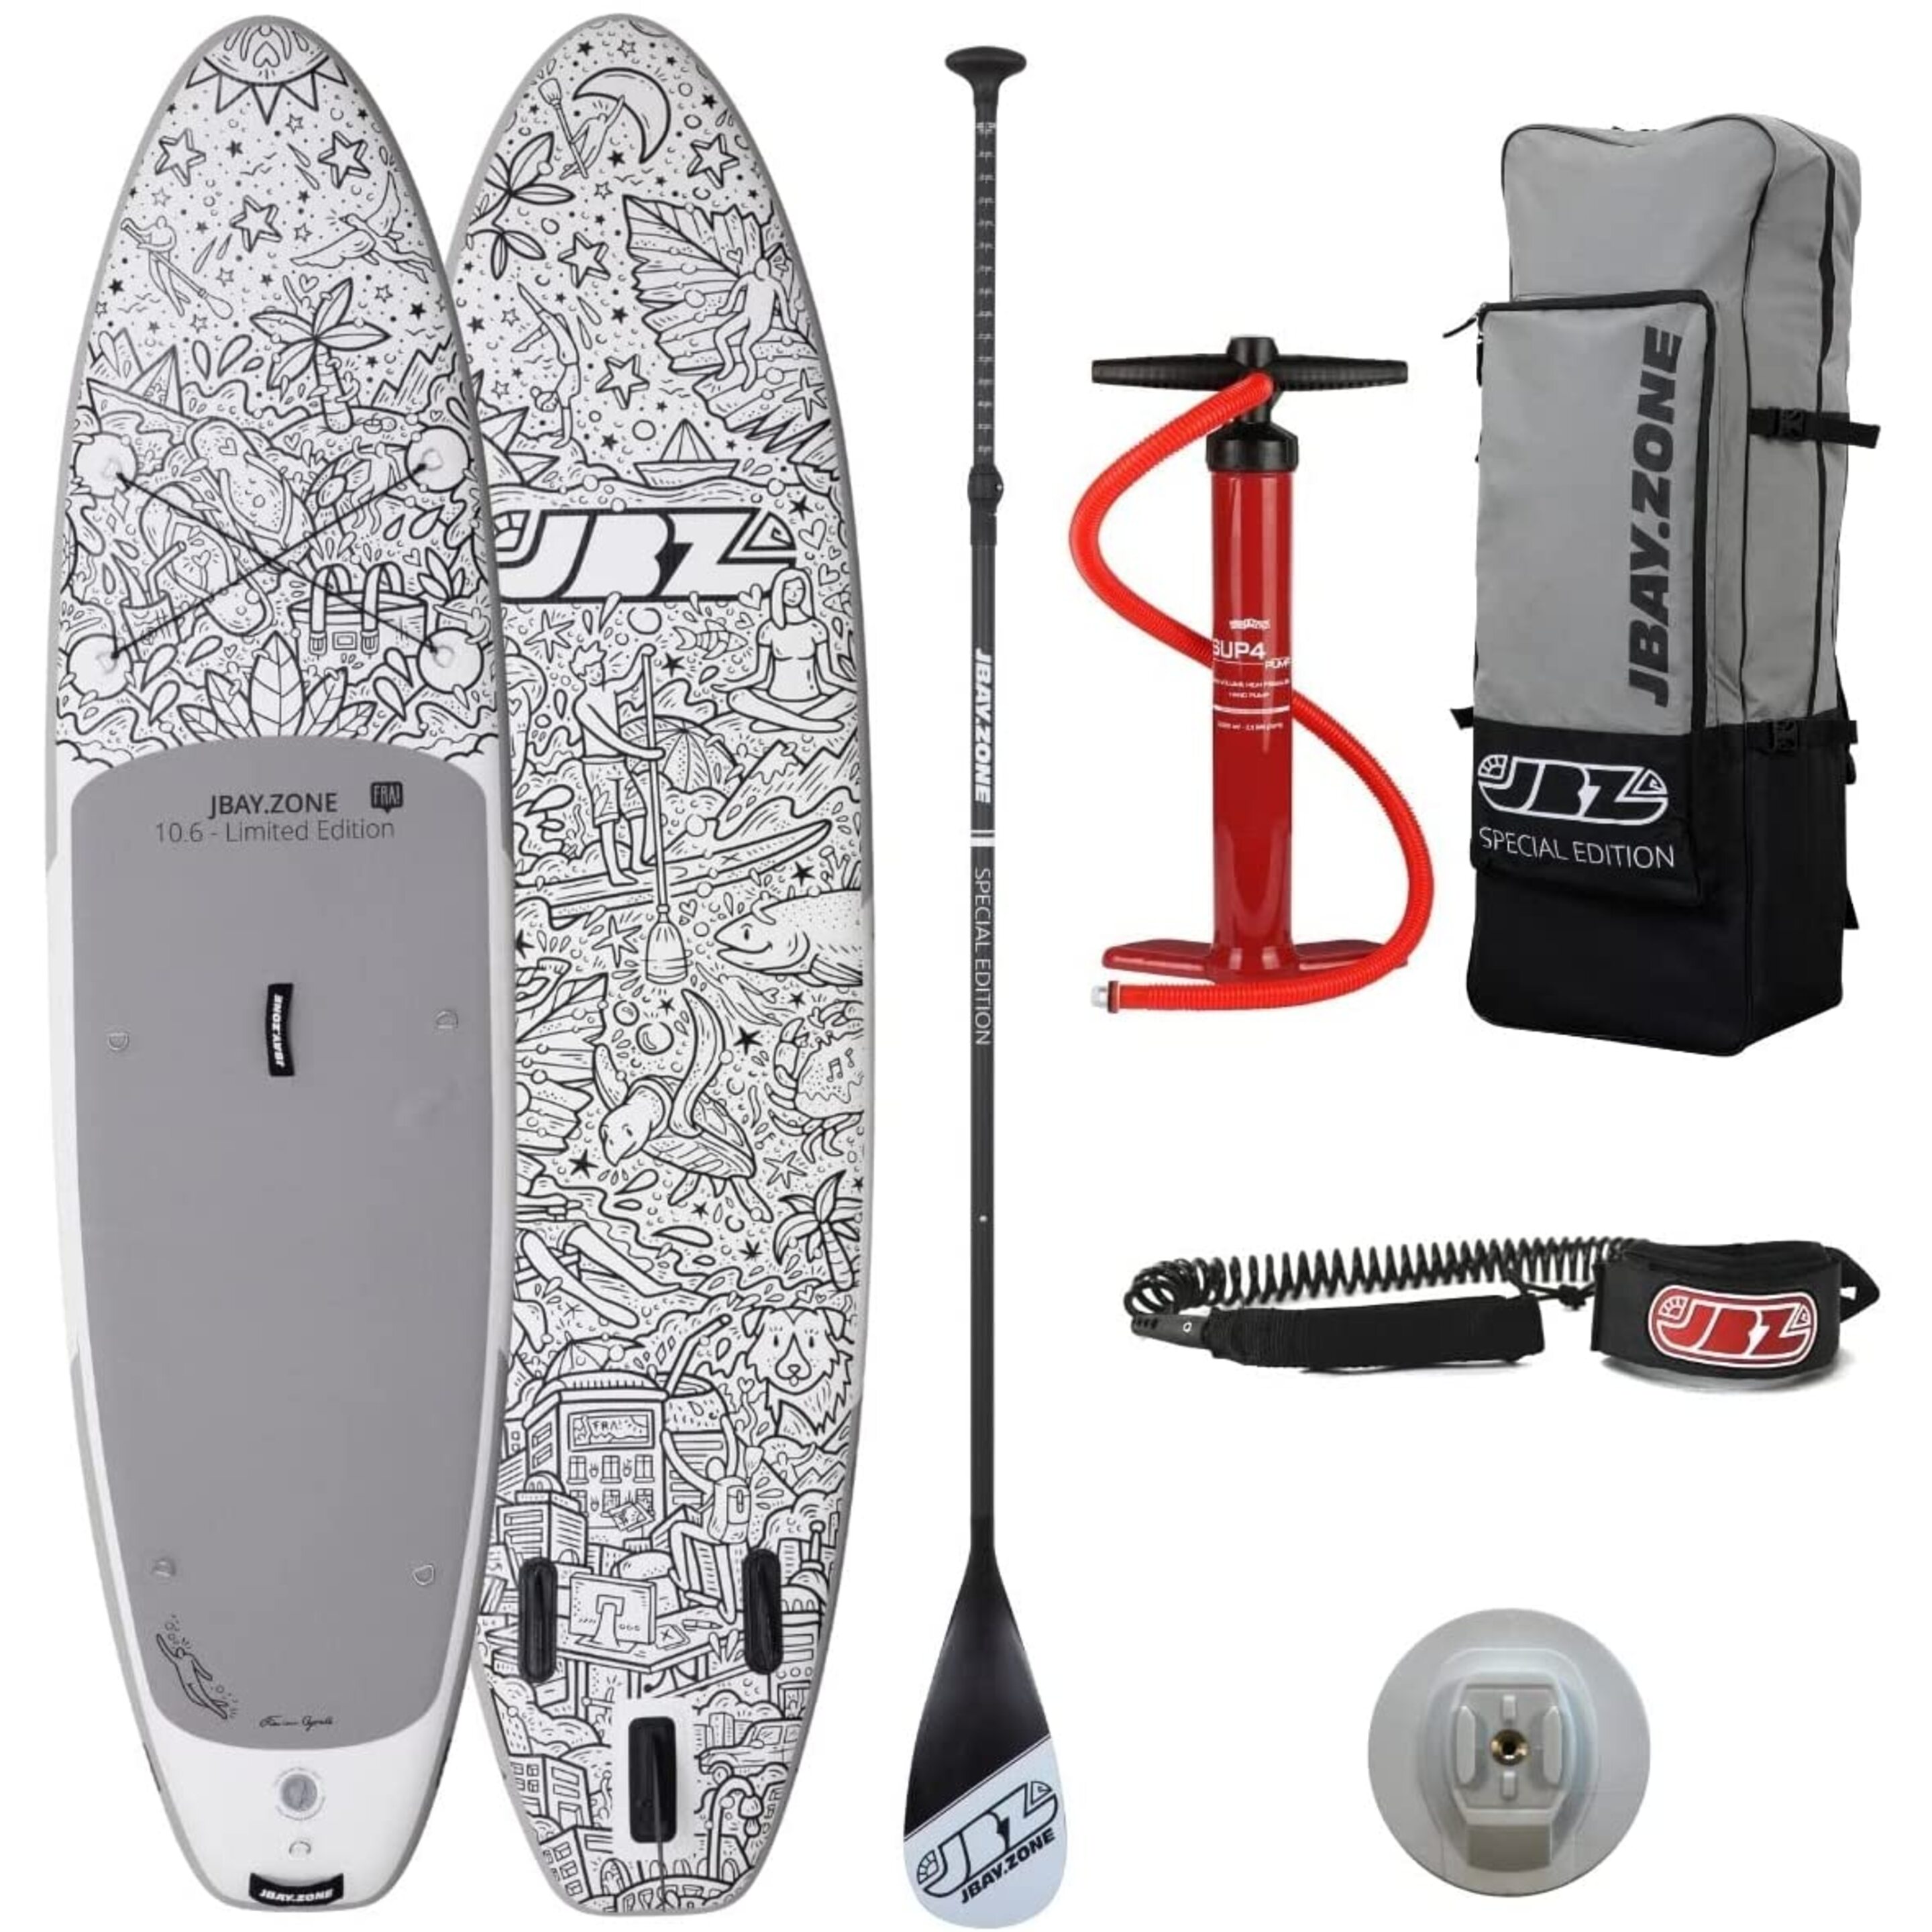 Tabla De Stand Up Paddle Surf Sup Hinchable Jbay.zone Fra! Limited Edition - blanco-negro - 